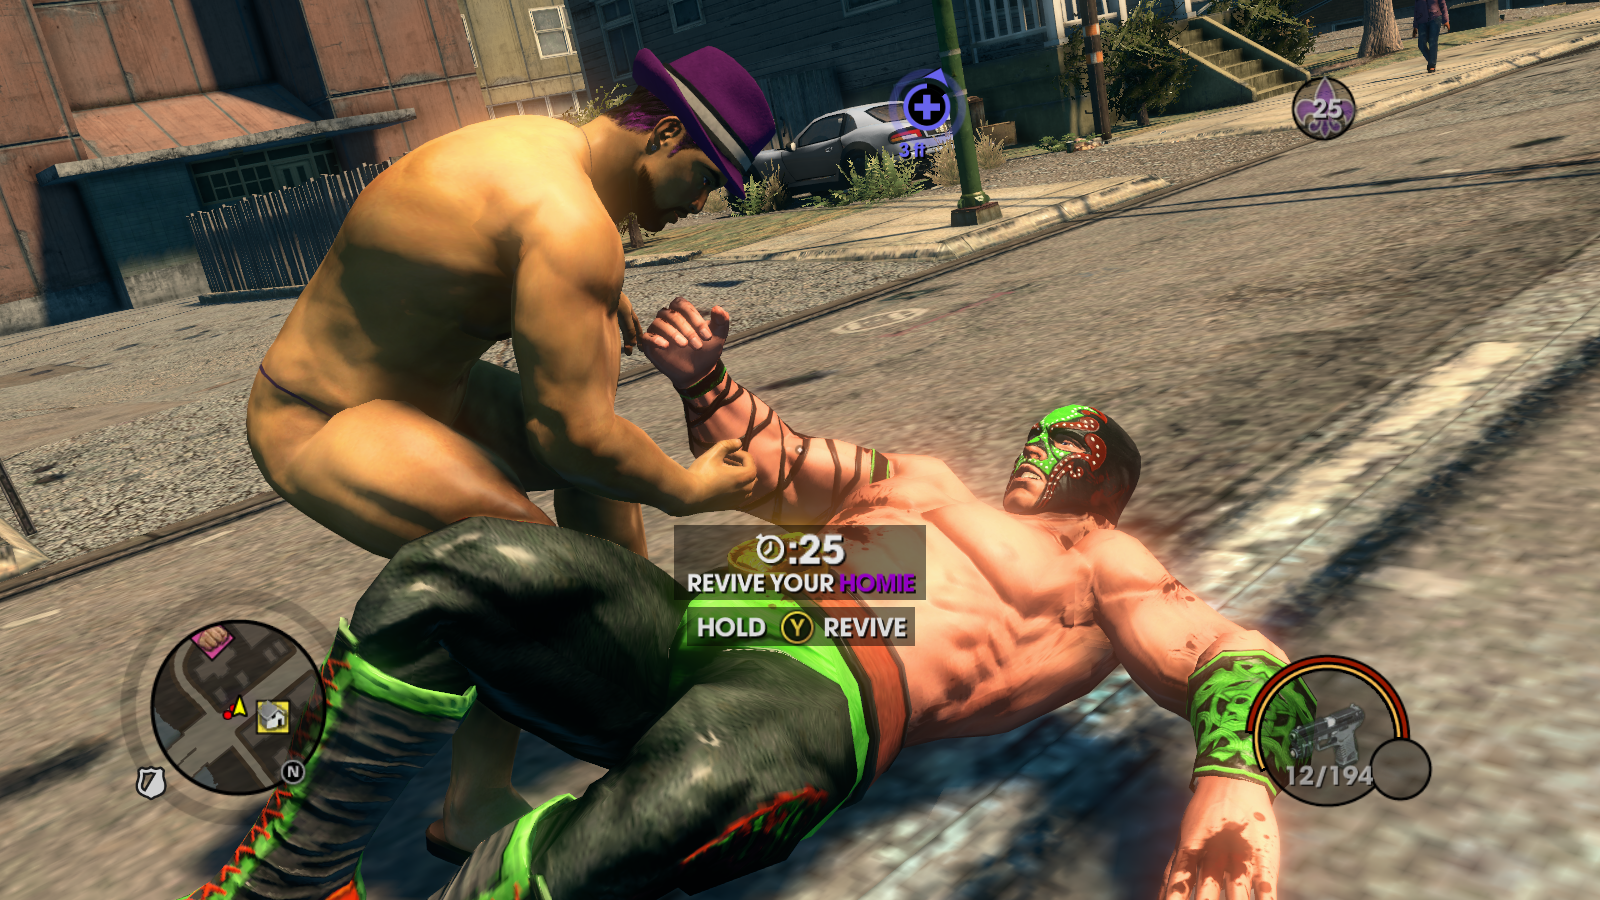 Saints Row Gay Porn Feet - Download Archives - Baragamer